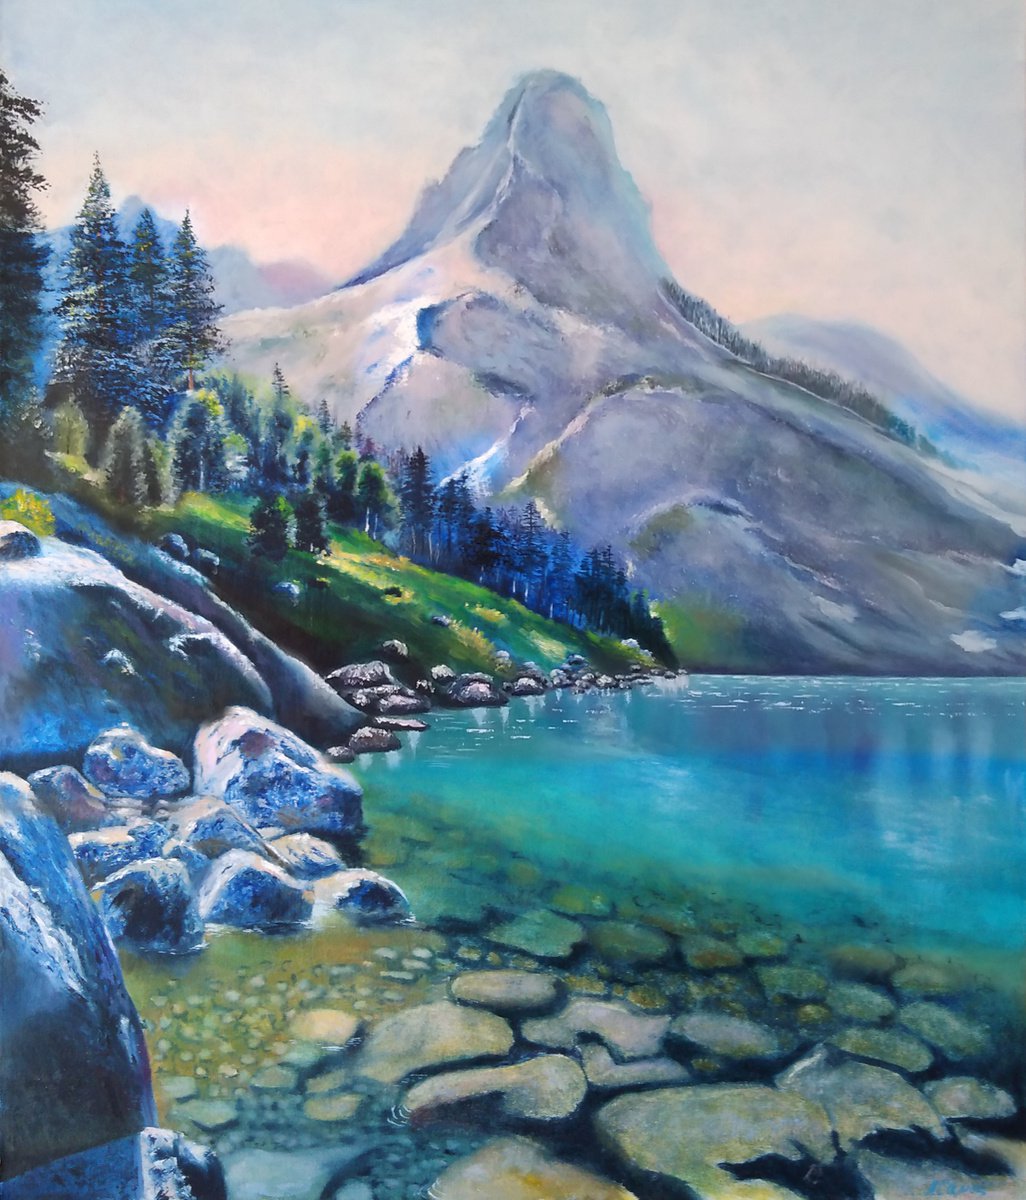 Blue lake - oil painting with mountains and lake by Liubov Samoilova